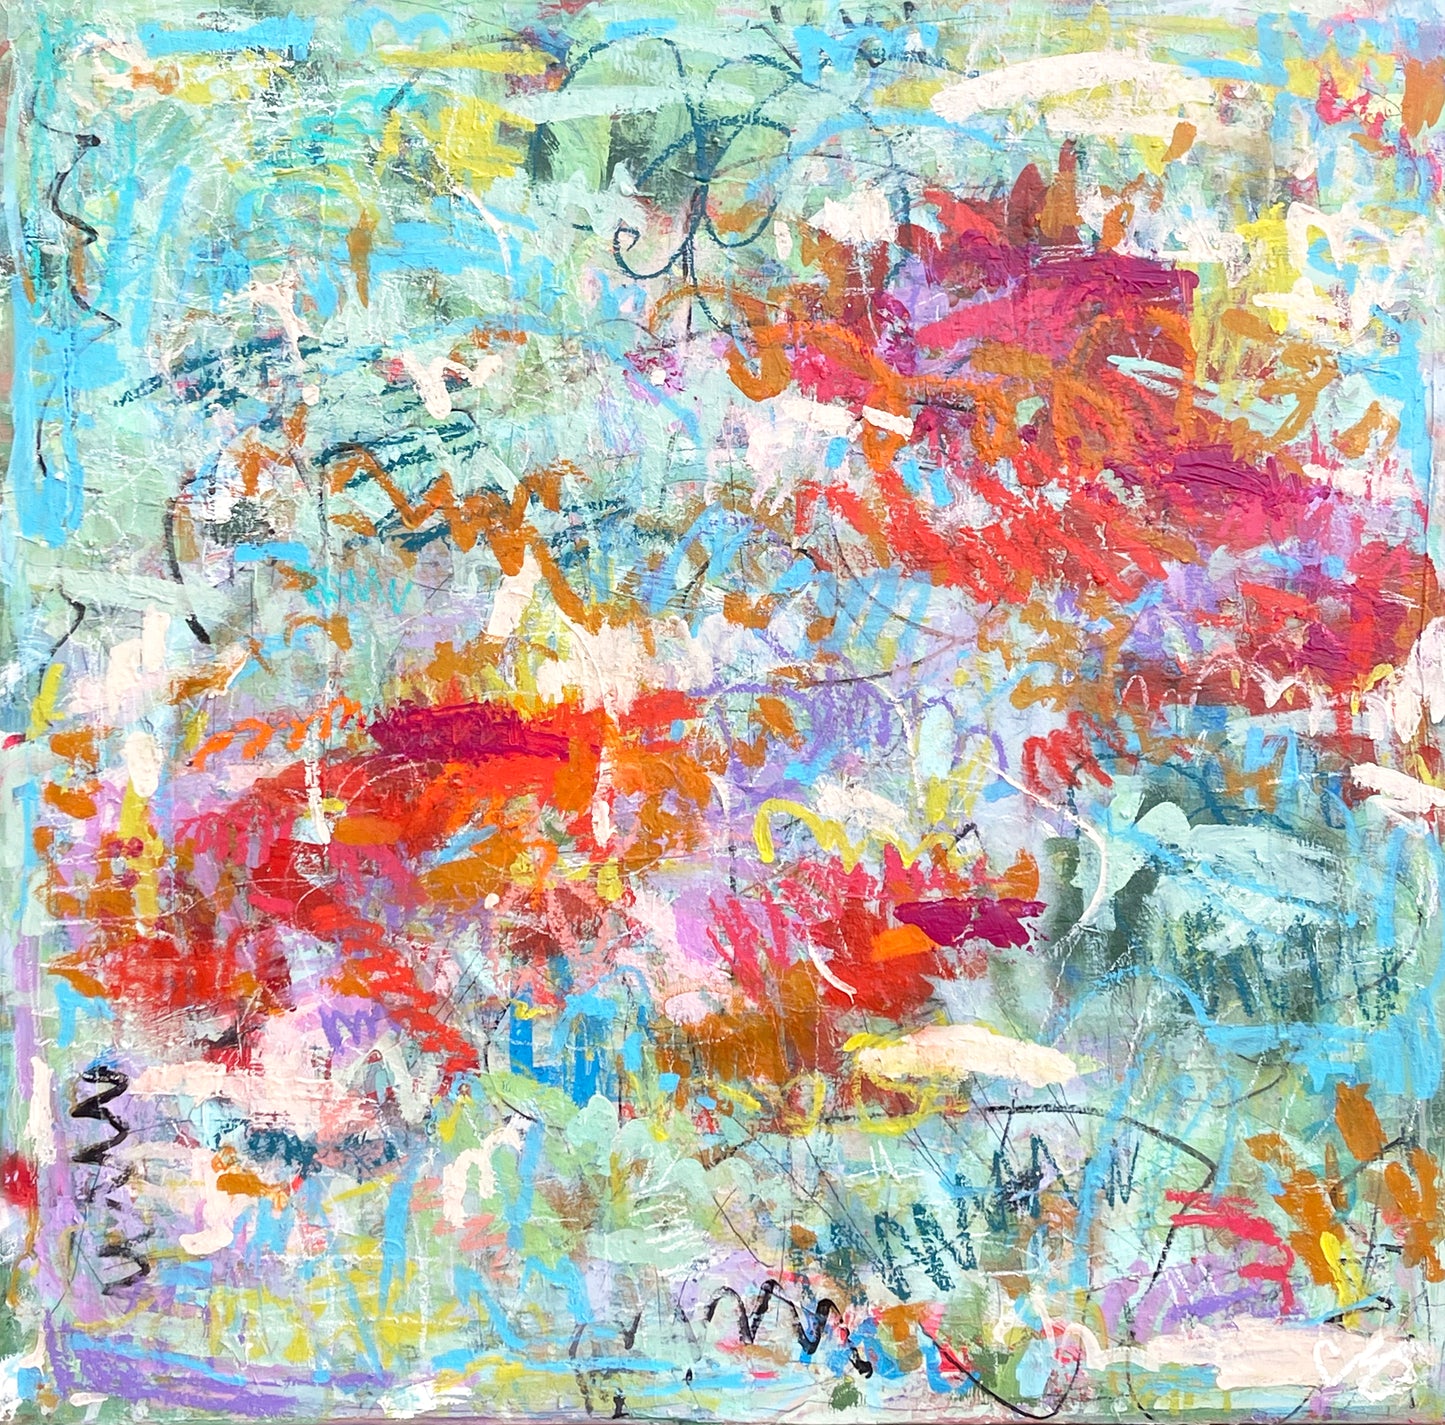 Fun Fete III Abstract Painting